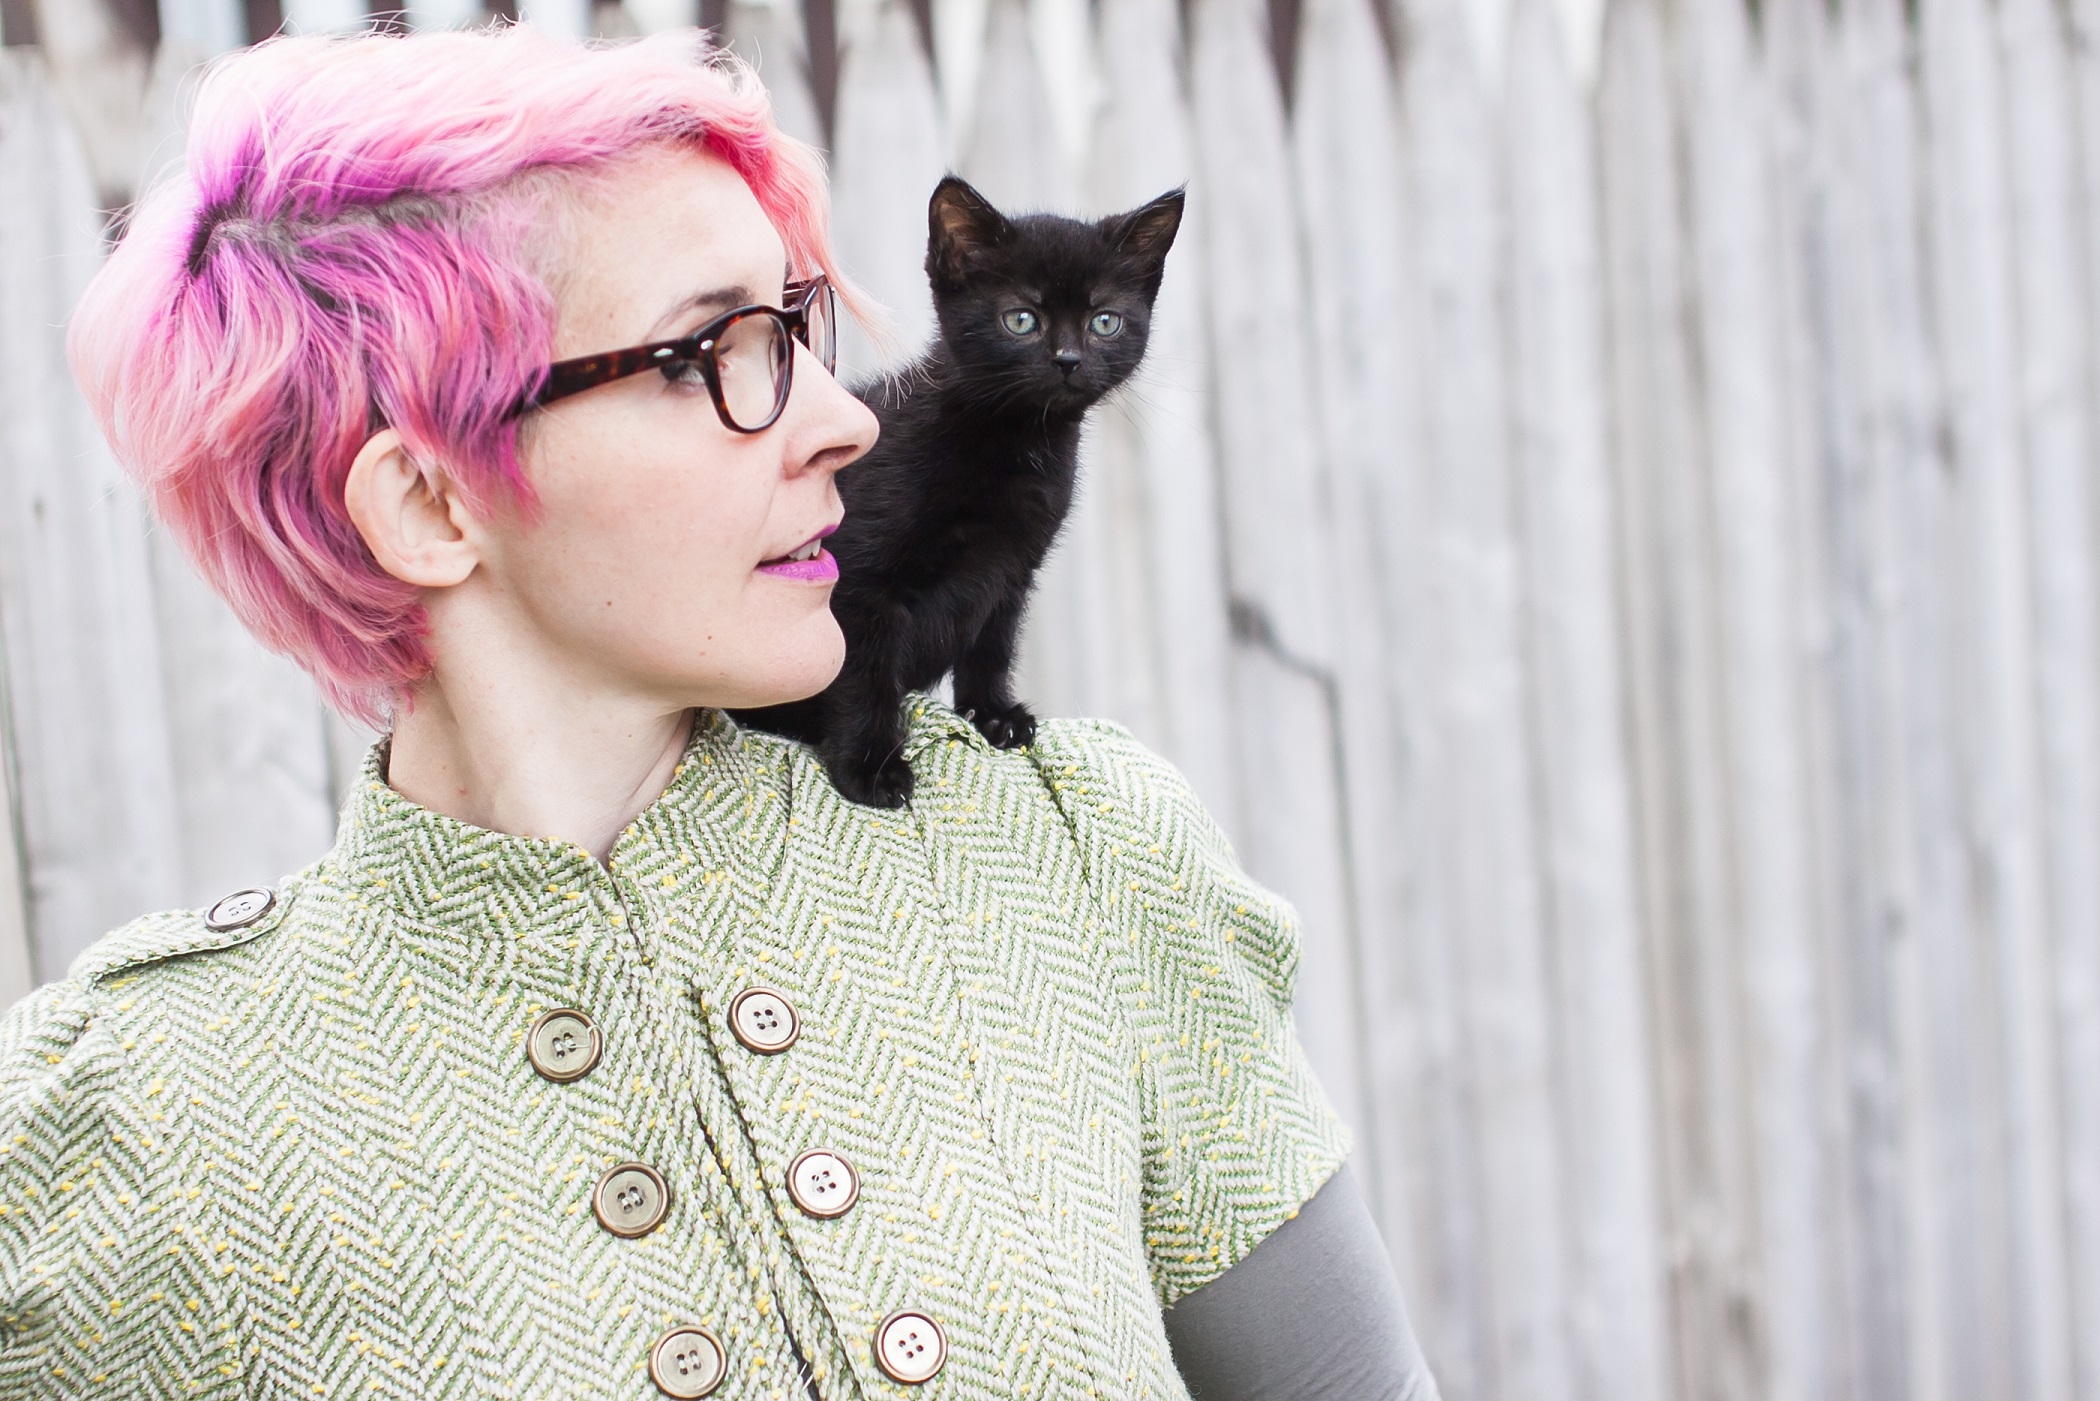 Sarah Donner and the Adventure of the Indie Musician/Cat Lady